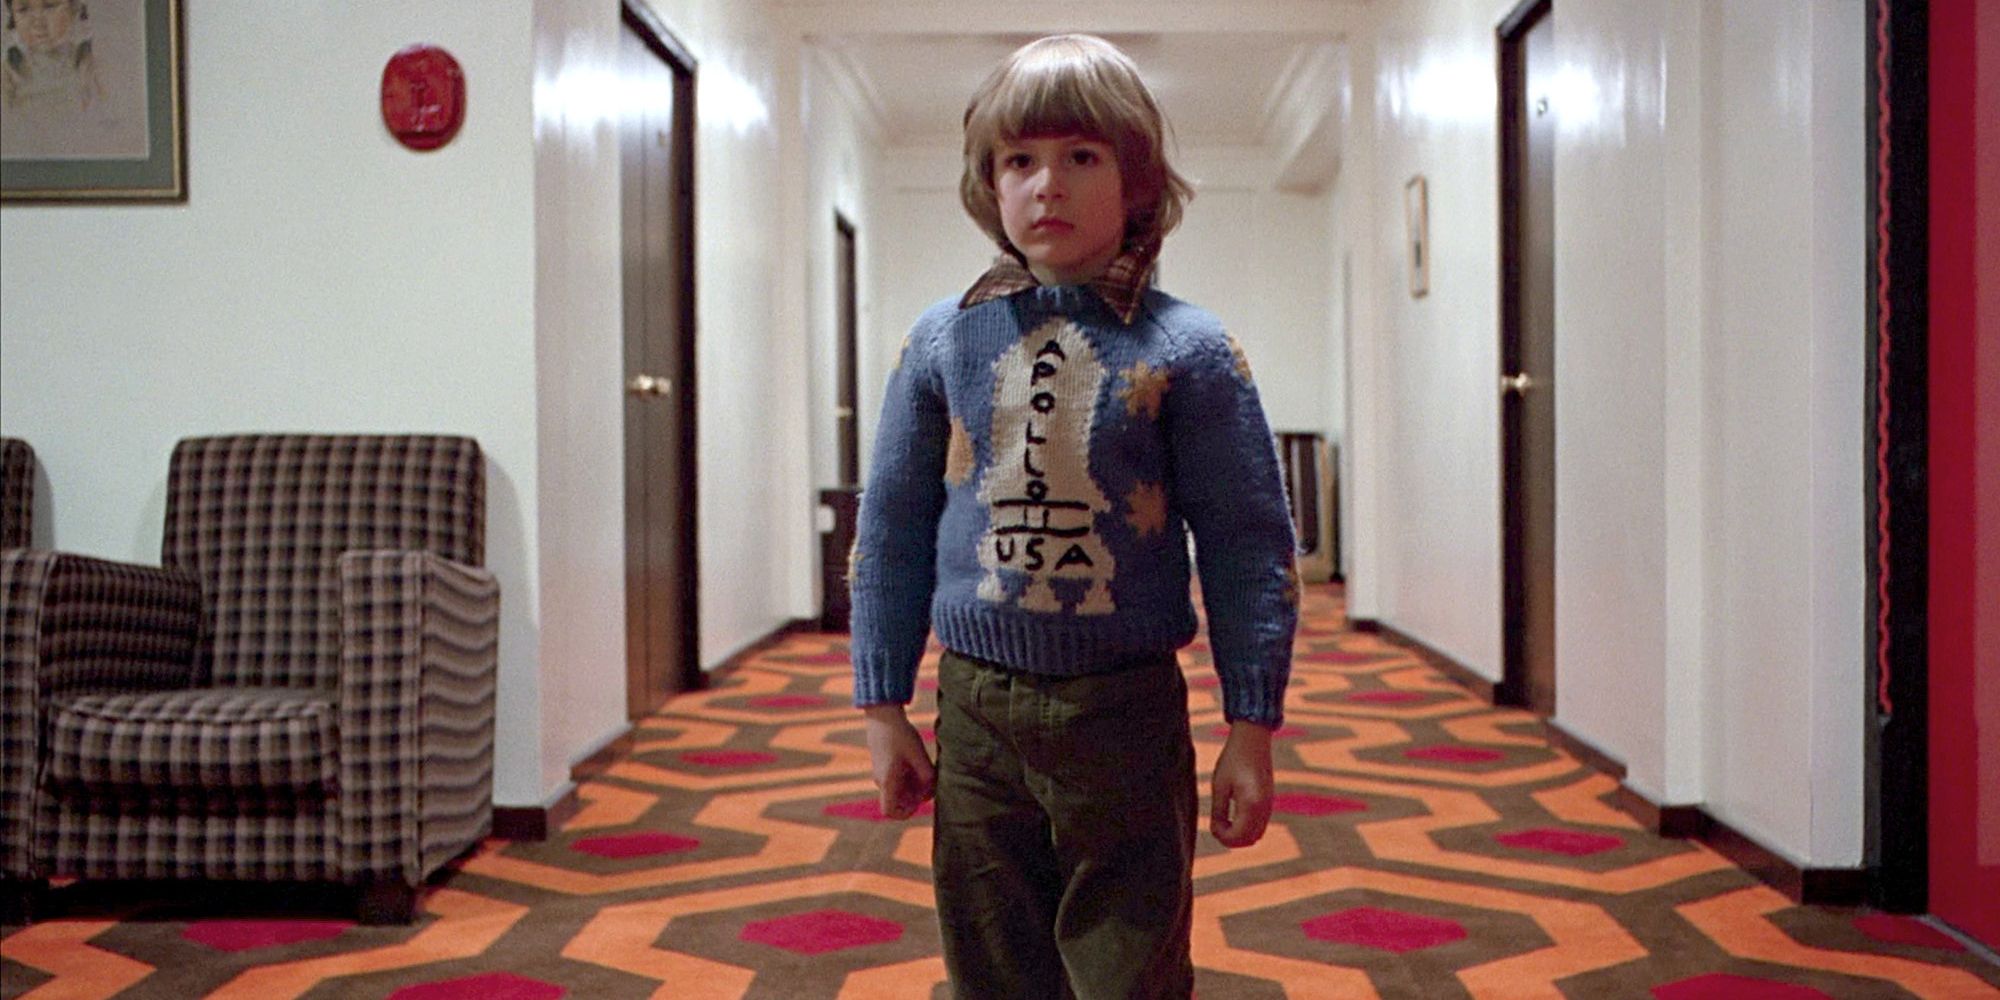 Why The Shining Is Linked to Moon Landing Conspiracy Theories